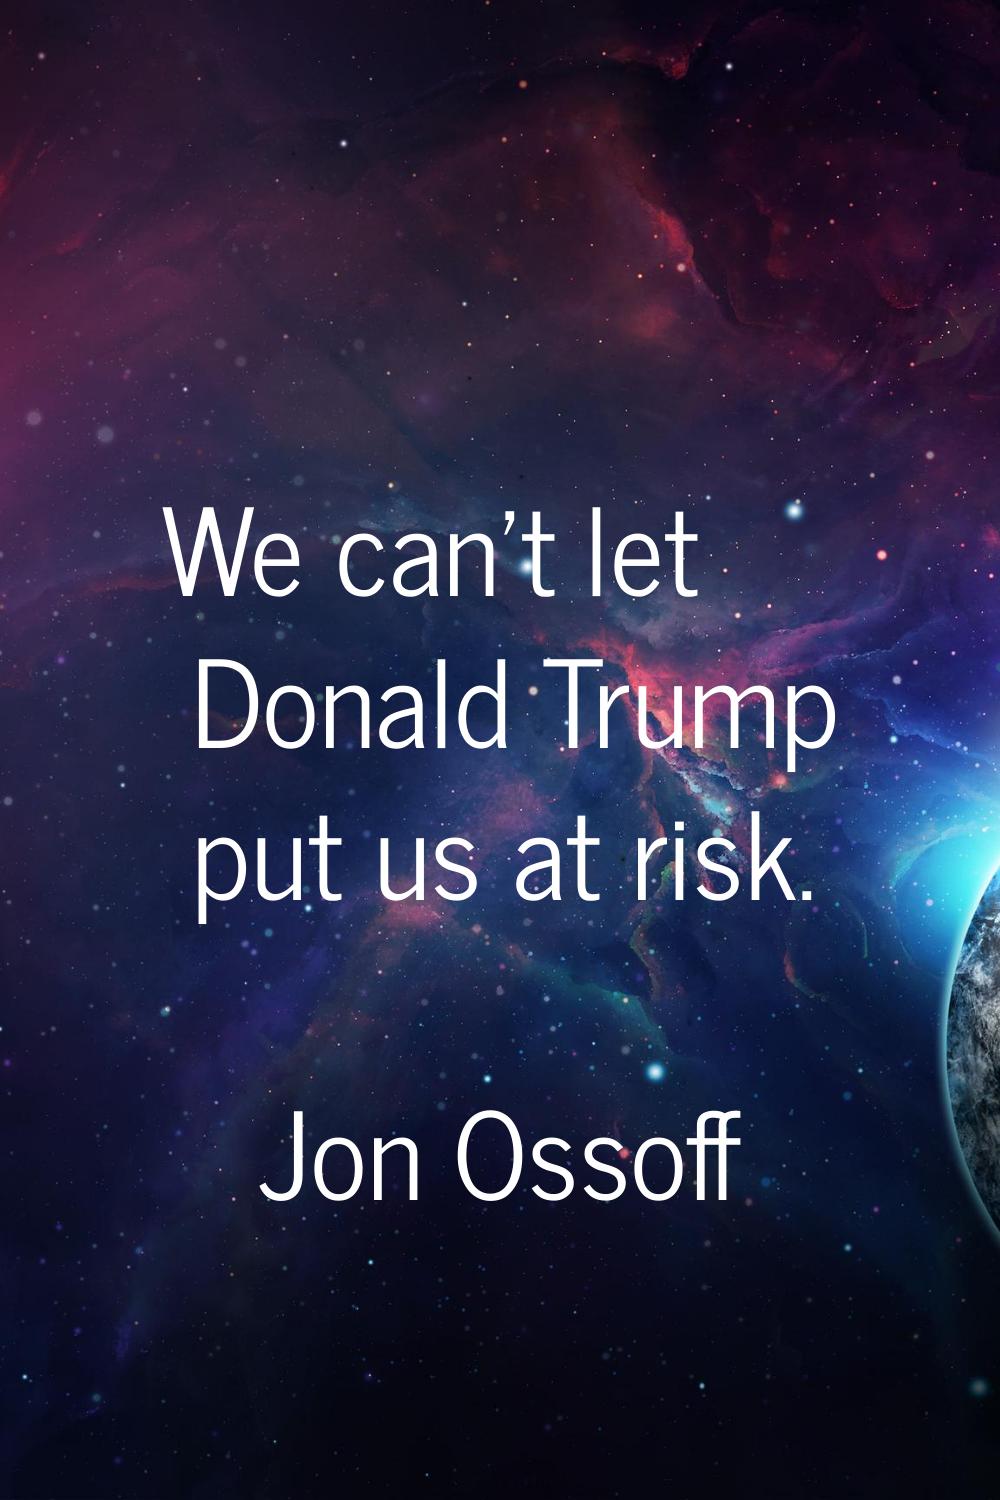 We can't let Donald Trump put us at risk.